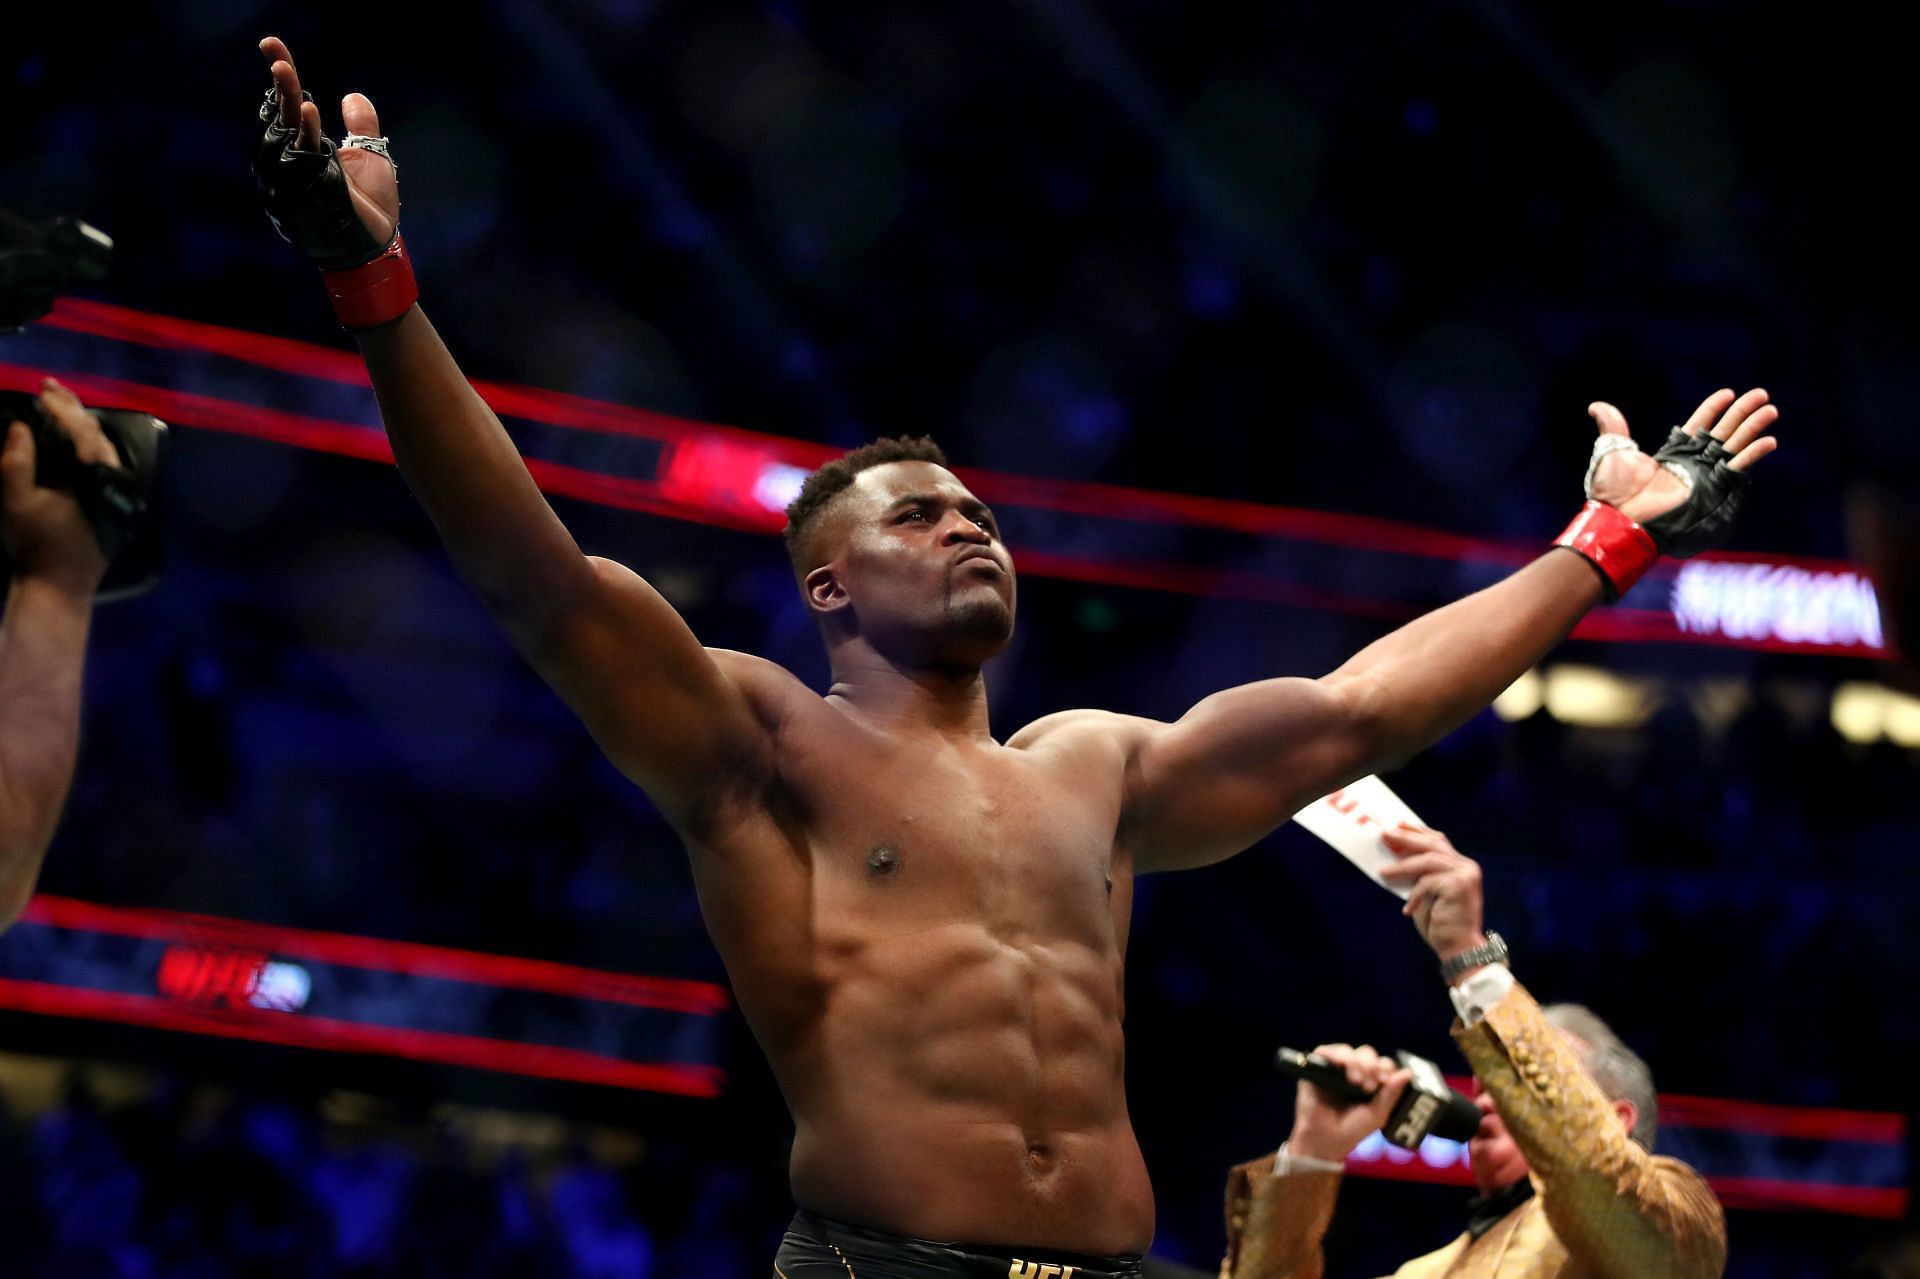 Francis Ngannou holds a record of 17-3